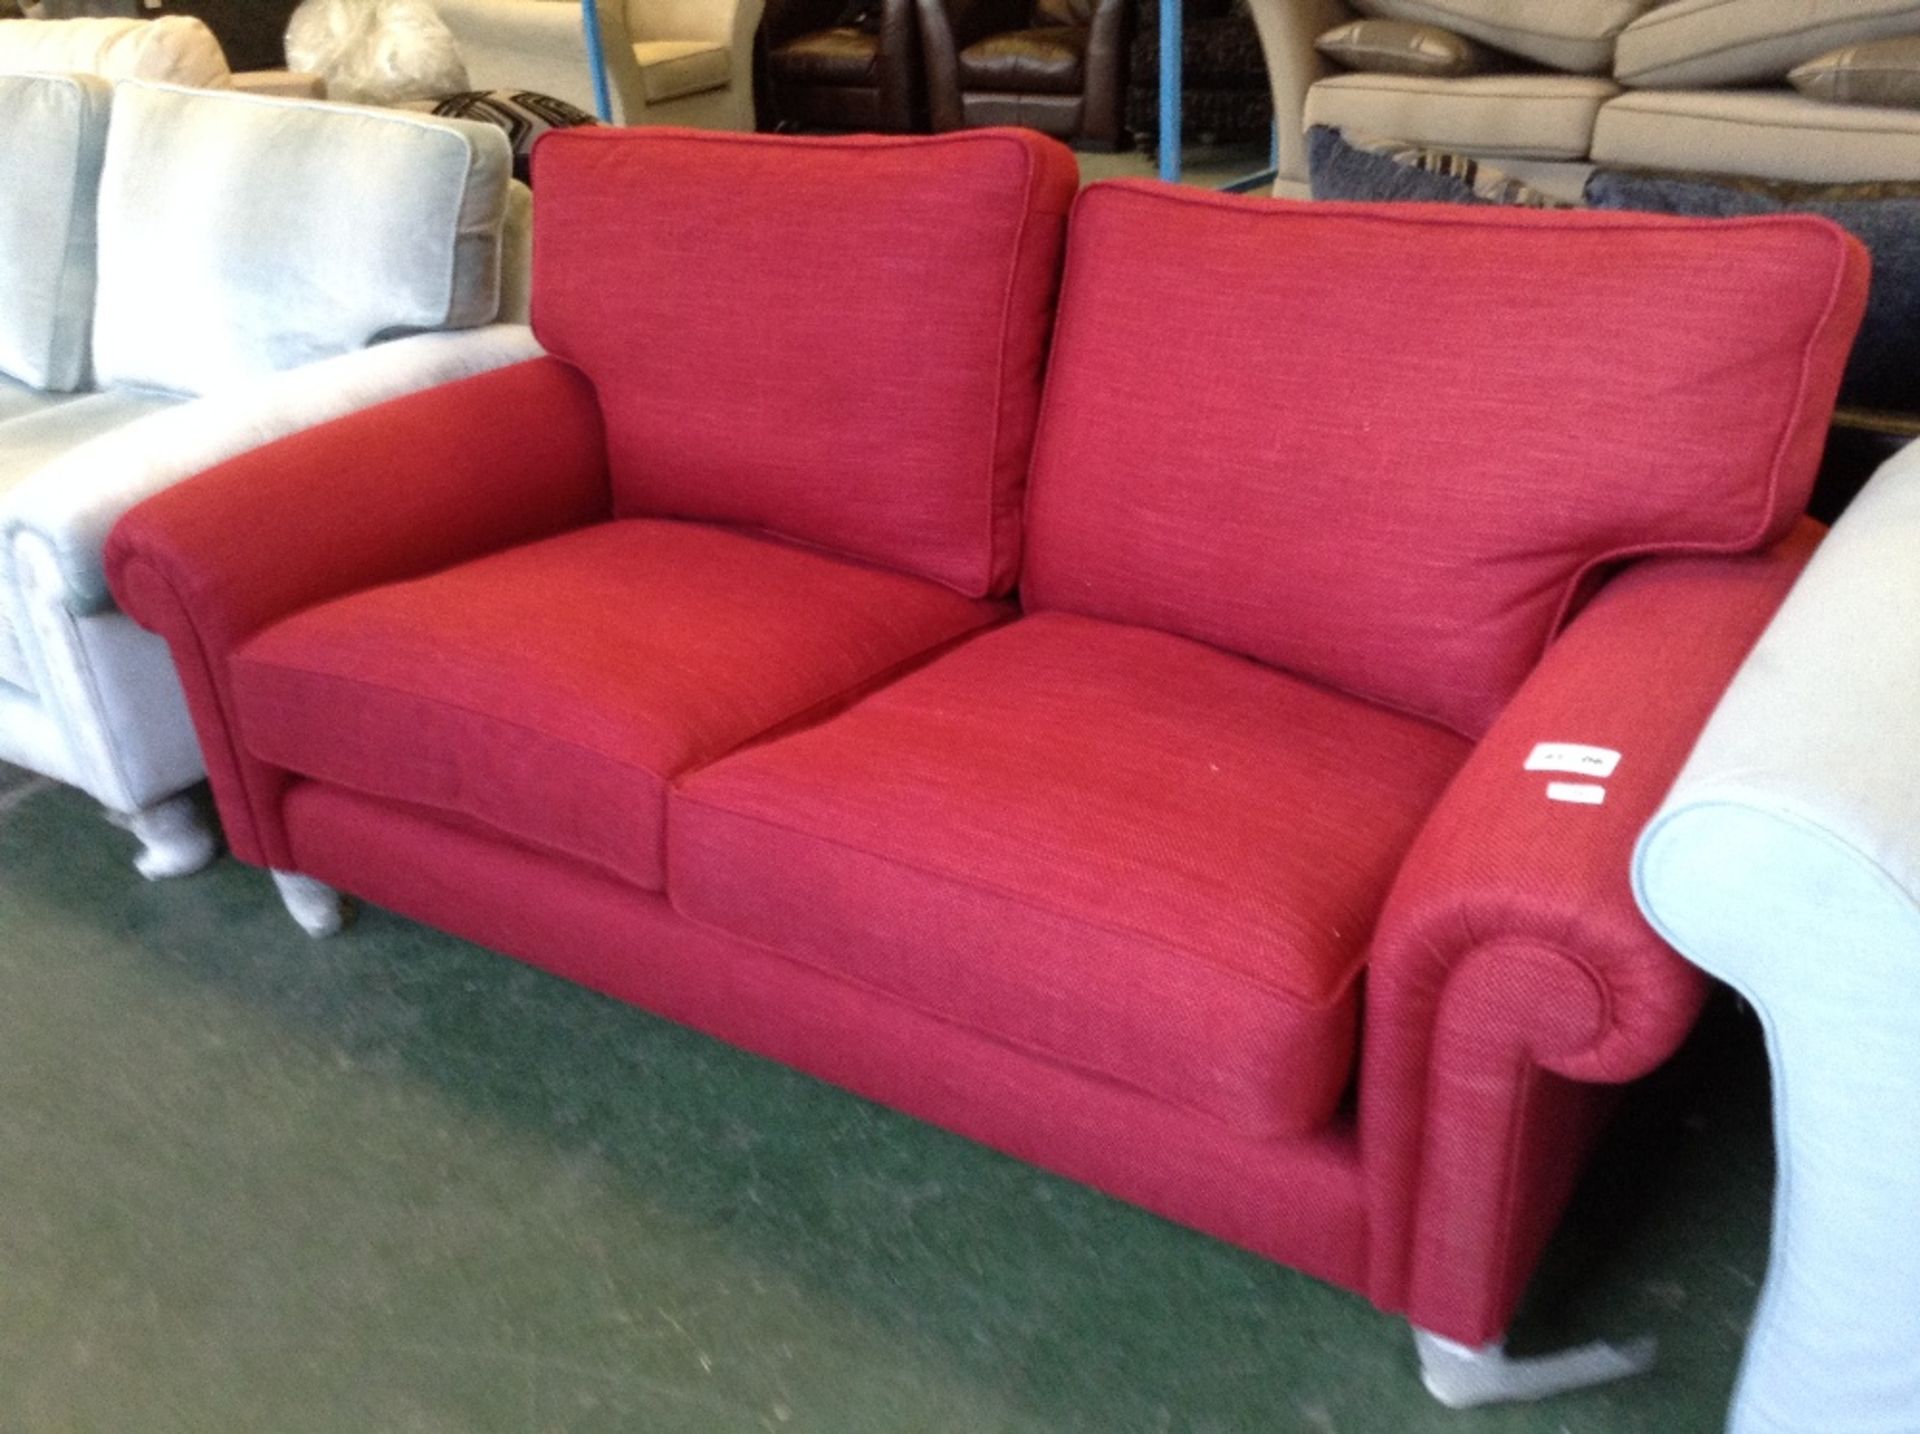 RED 2 SEATER SOFA (4106)